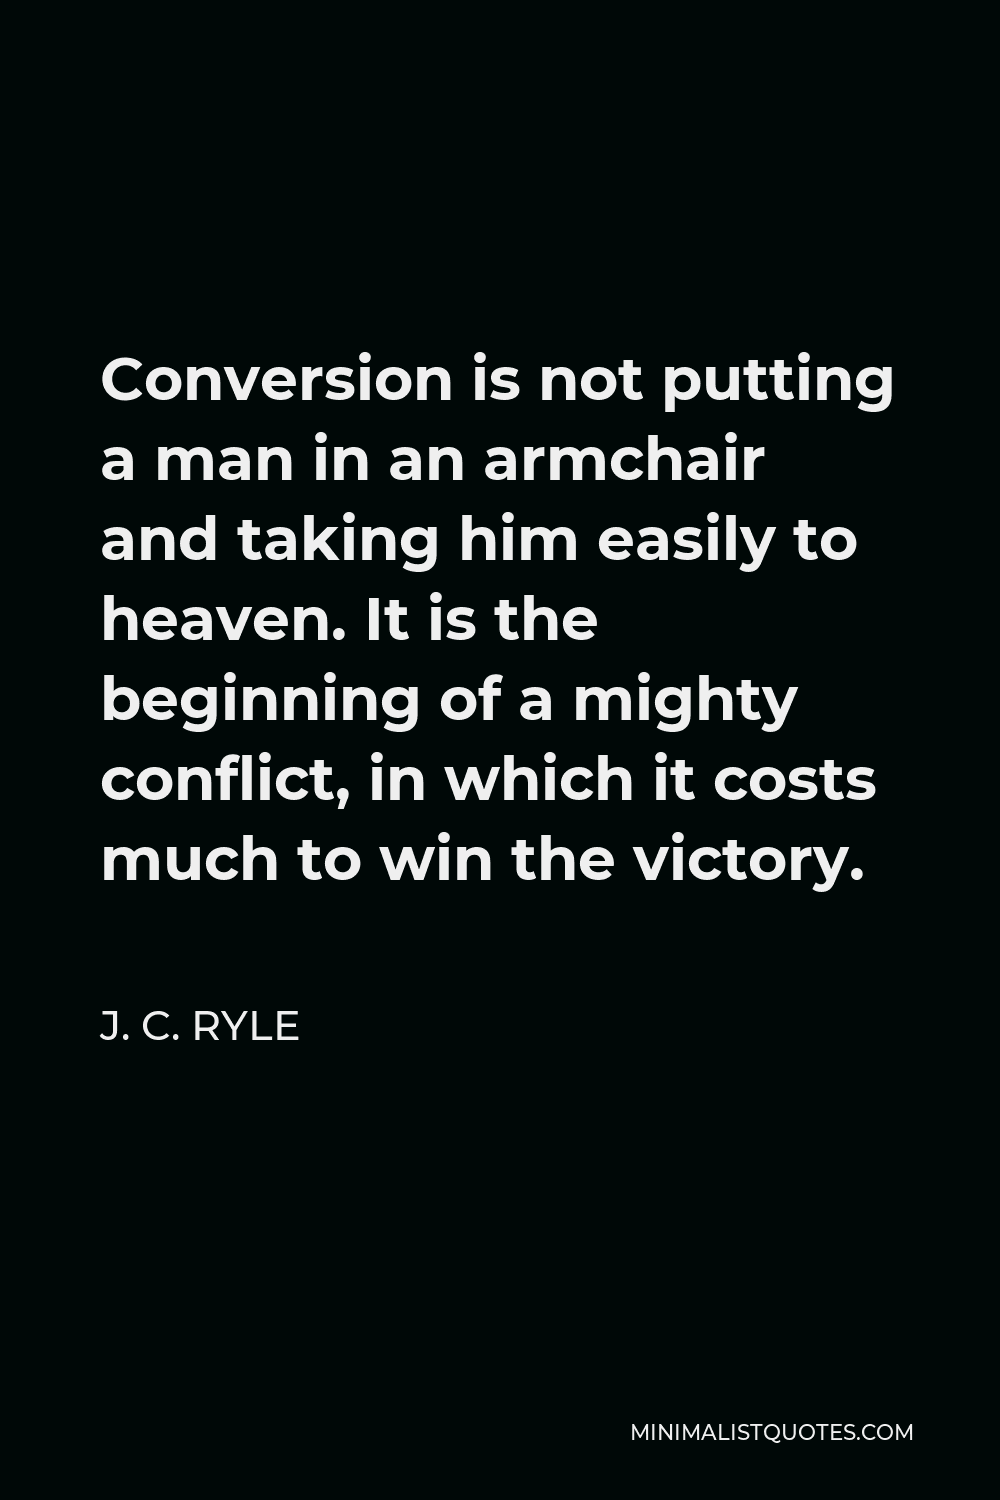 J. C. Ryle Quote - Conversion is not putting a man in an armchair and taking him easily to heaven. It is the beginning of a mighty conflict, in which it costs much to win the victory.